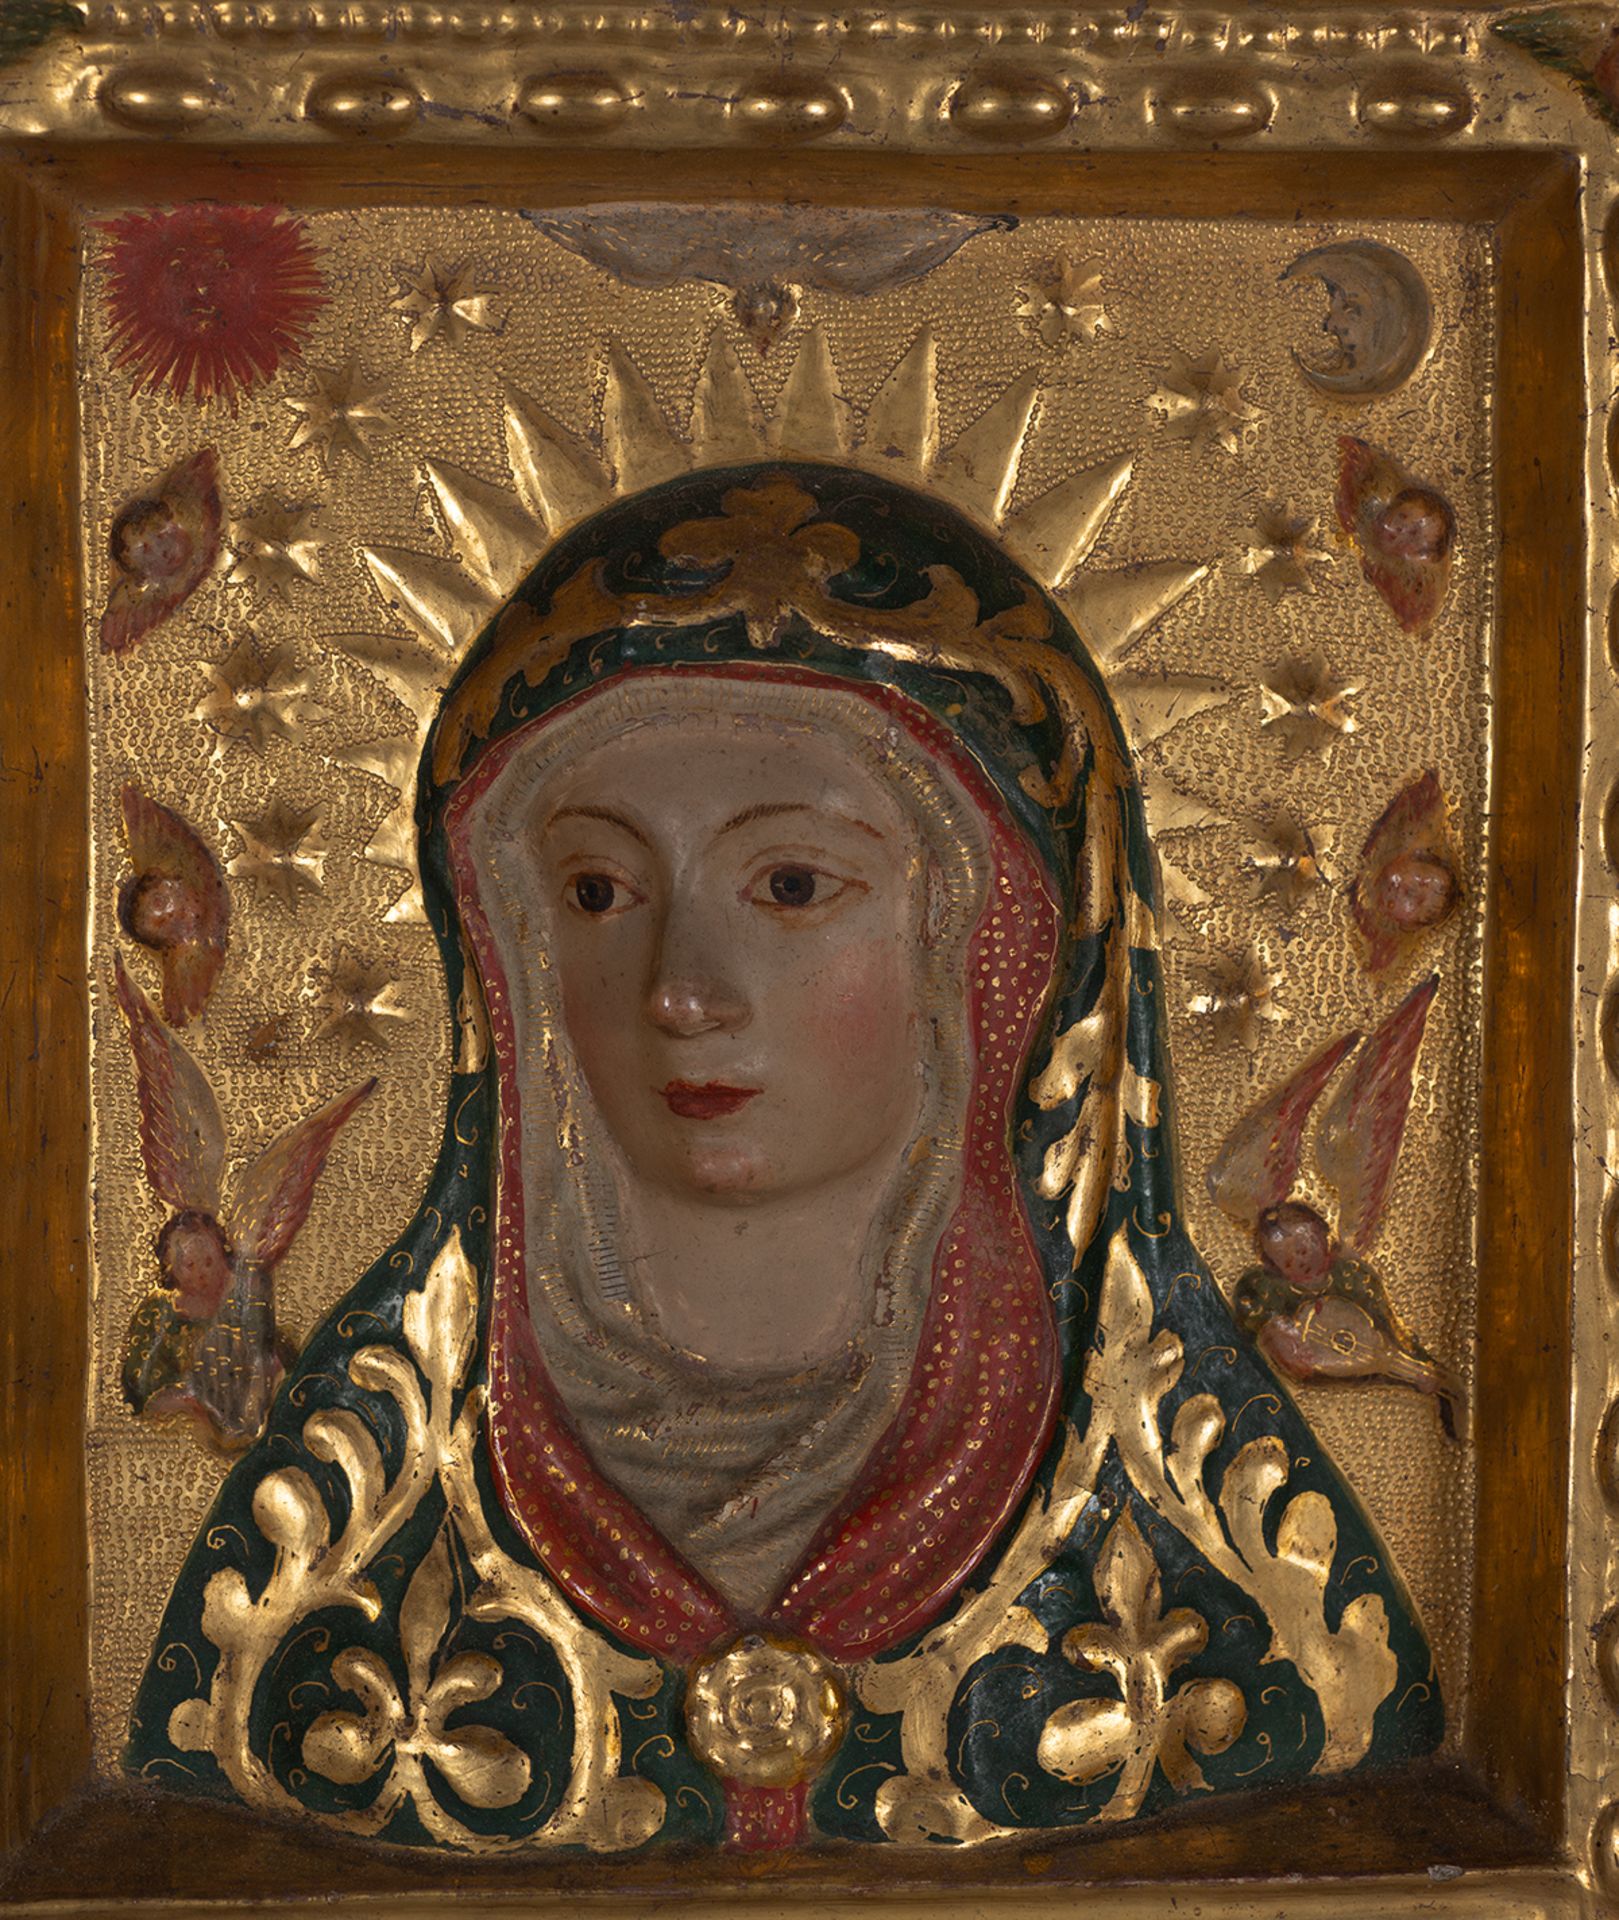 Important tabernacle from the 16th century with the face of Mary - Image 3 of 6